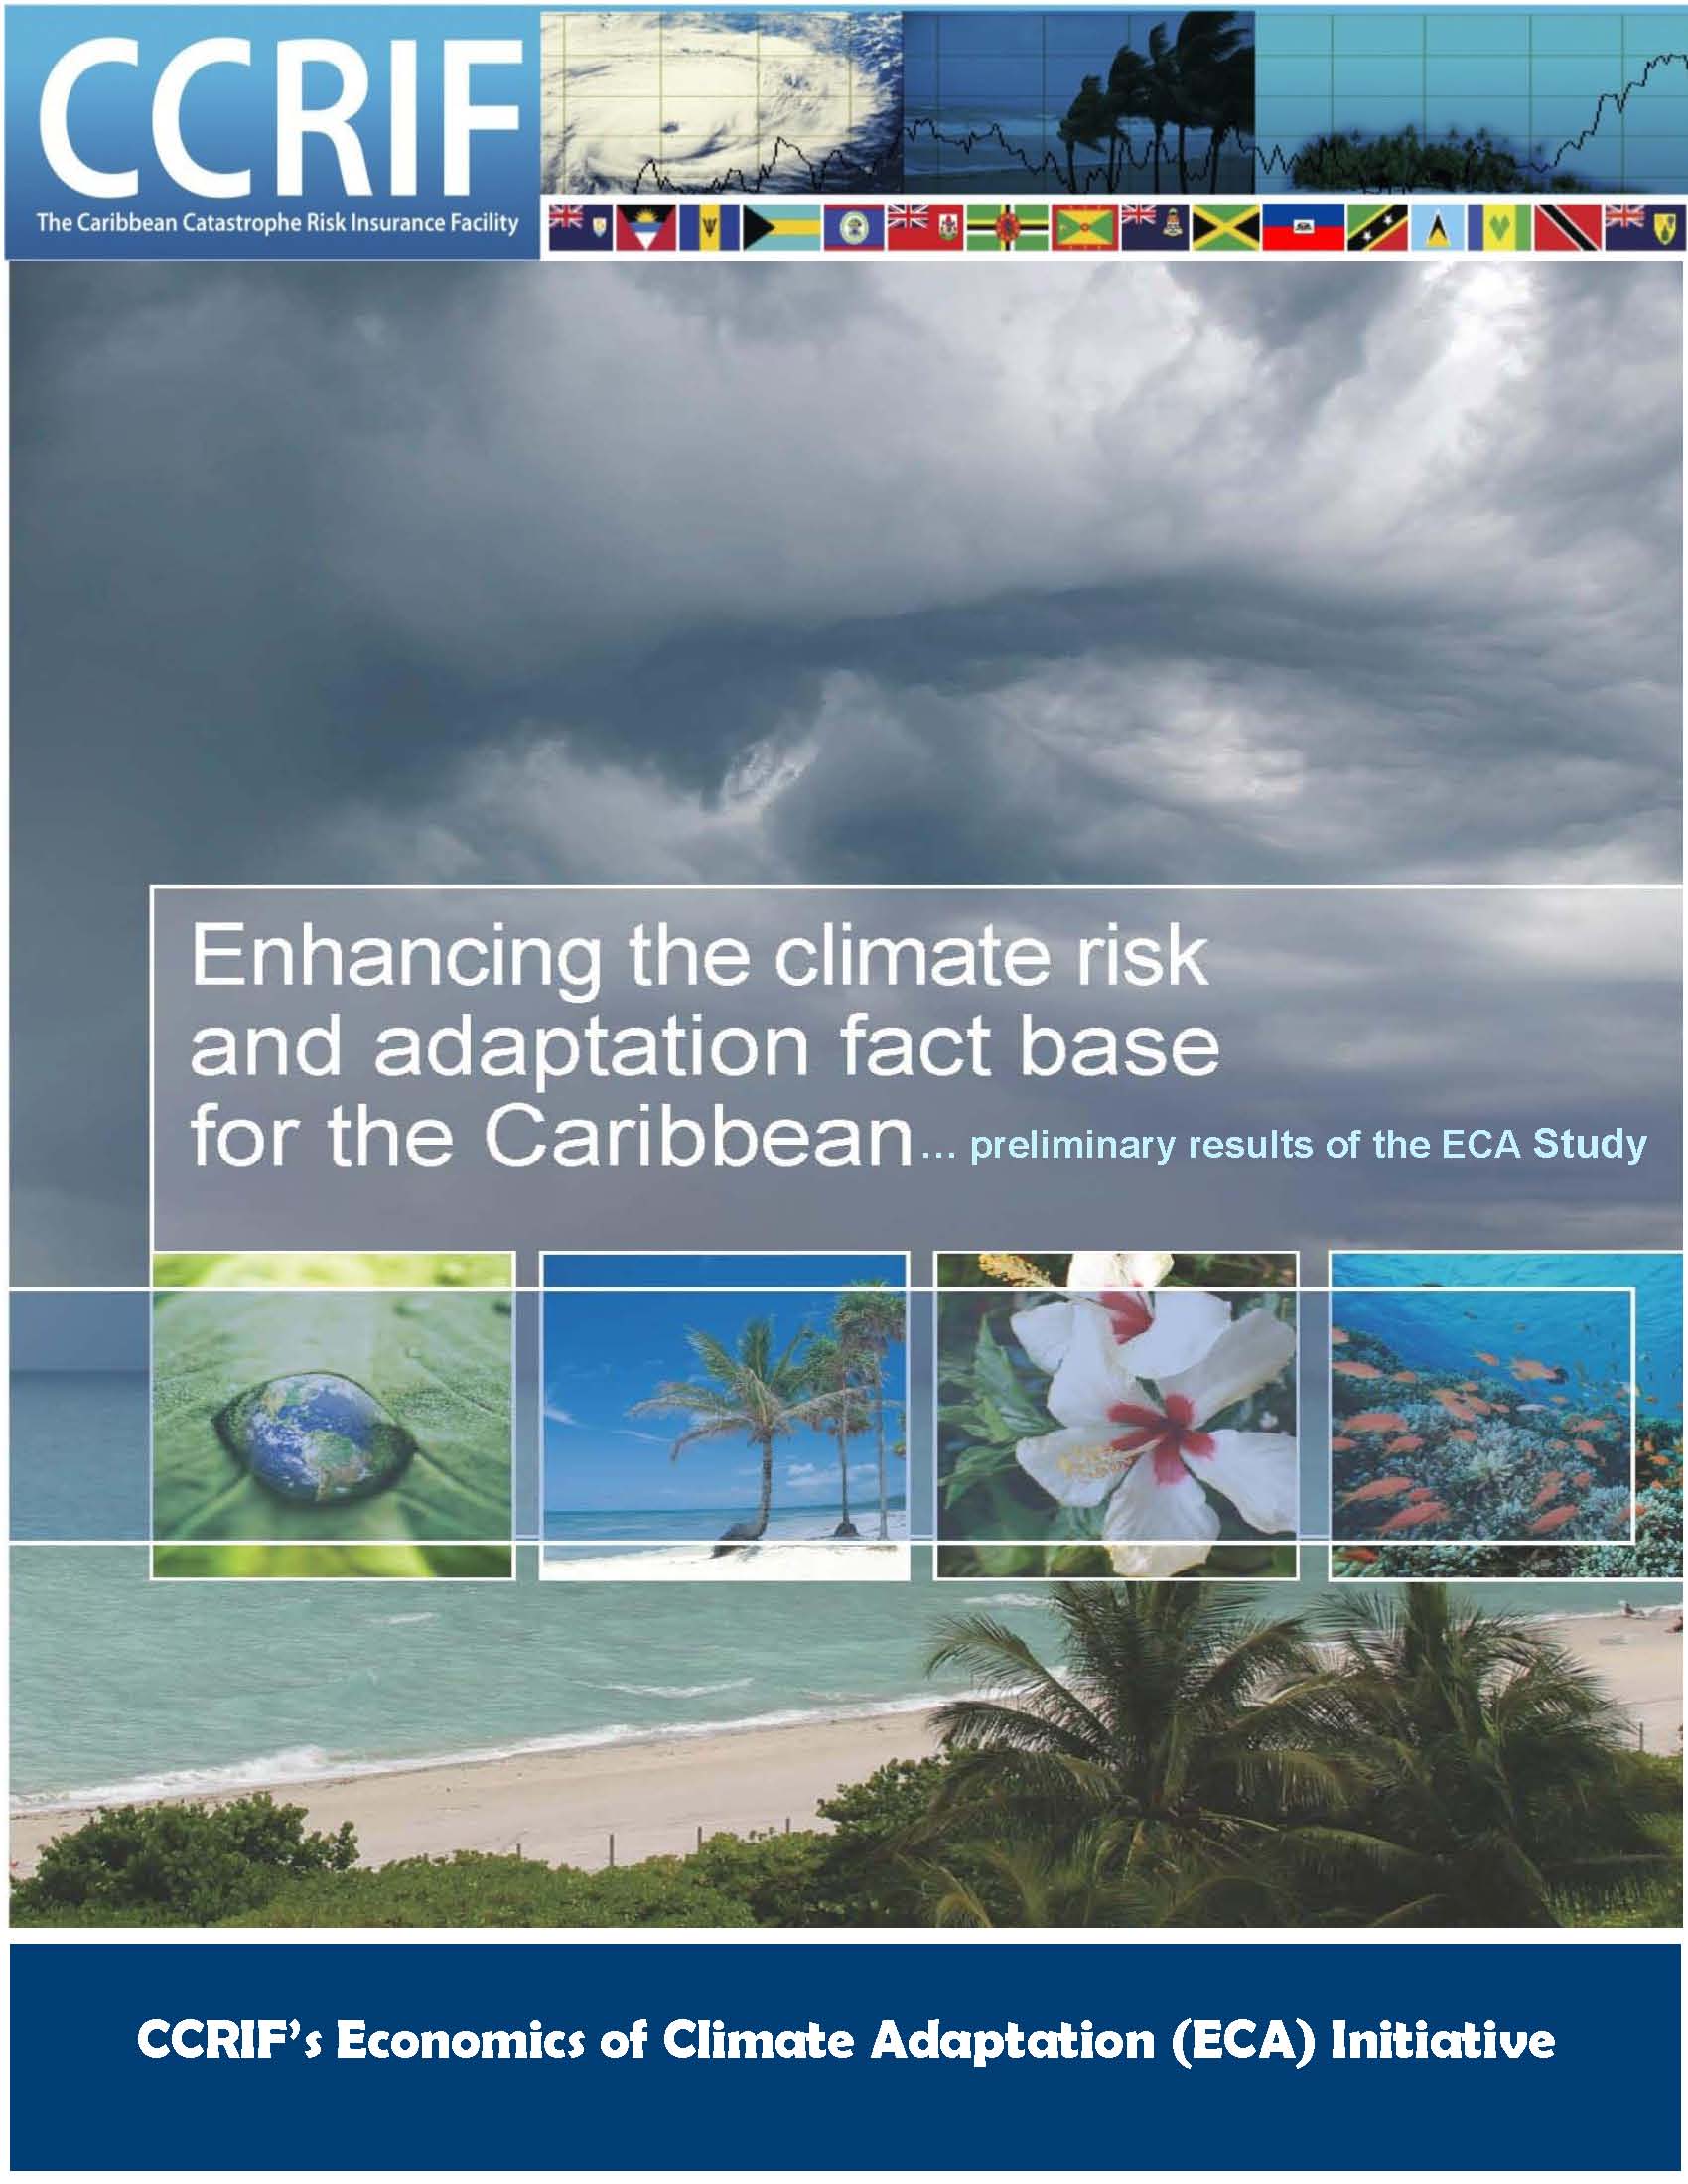 Brochure - Enhancing the Climate Risk and Adaptation Fact Base for the Caribbean